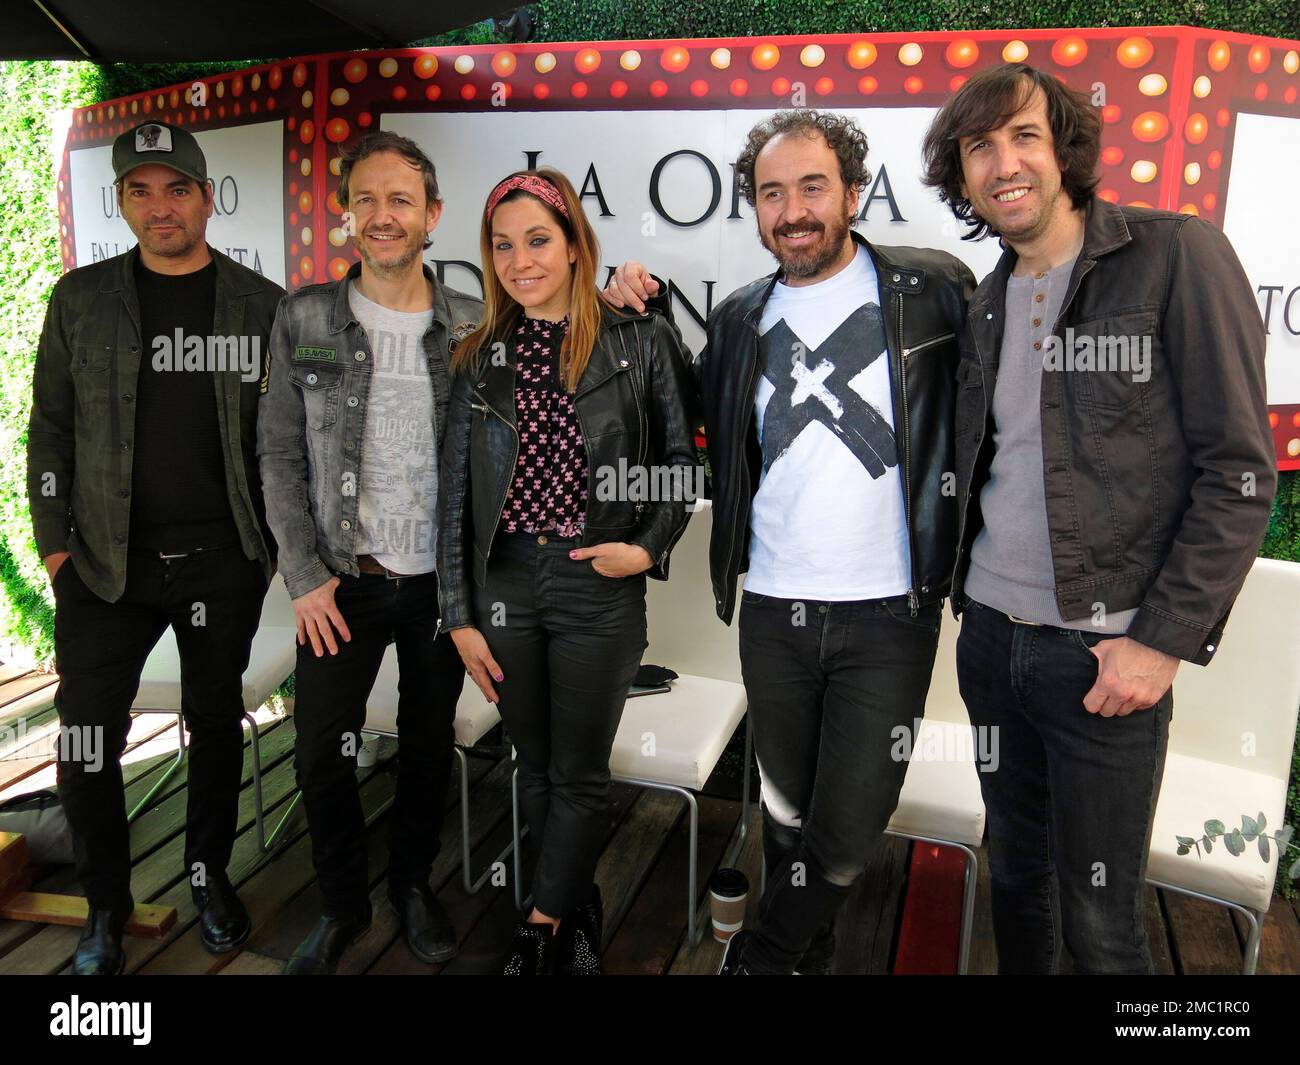 Members of Spain's band La Oreja de Van Gogh, from left, Alvaro Fuentes, Pablo Benegas, Leire Martinez, Xabi San Martín and Haritz Garde pose for a group photo on the sidelines of interviews with the media in Mexico City, March 3, 2022. (AP Photo/Berenice Bautista) Stock Photo